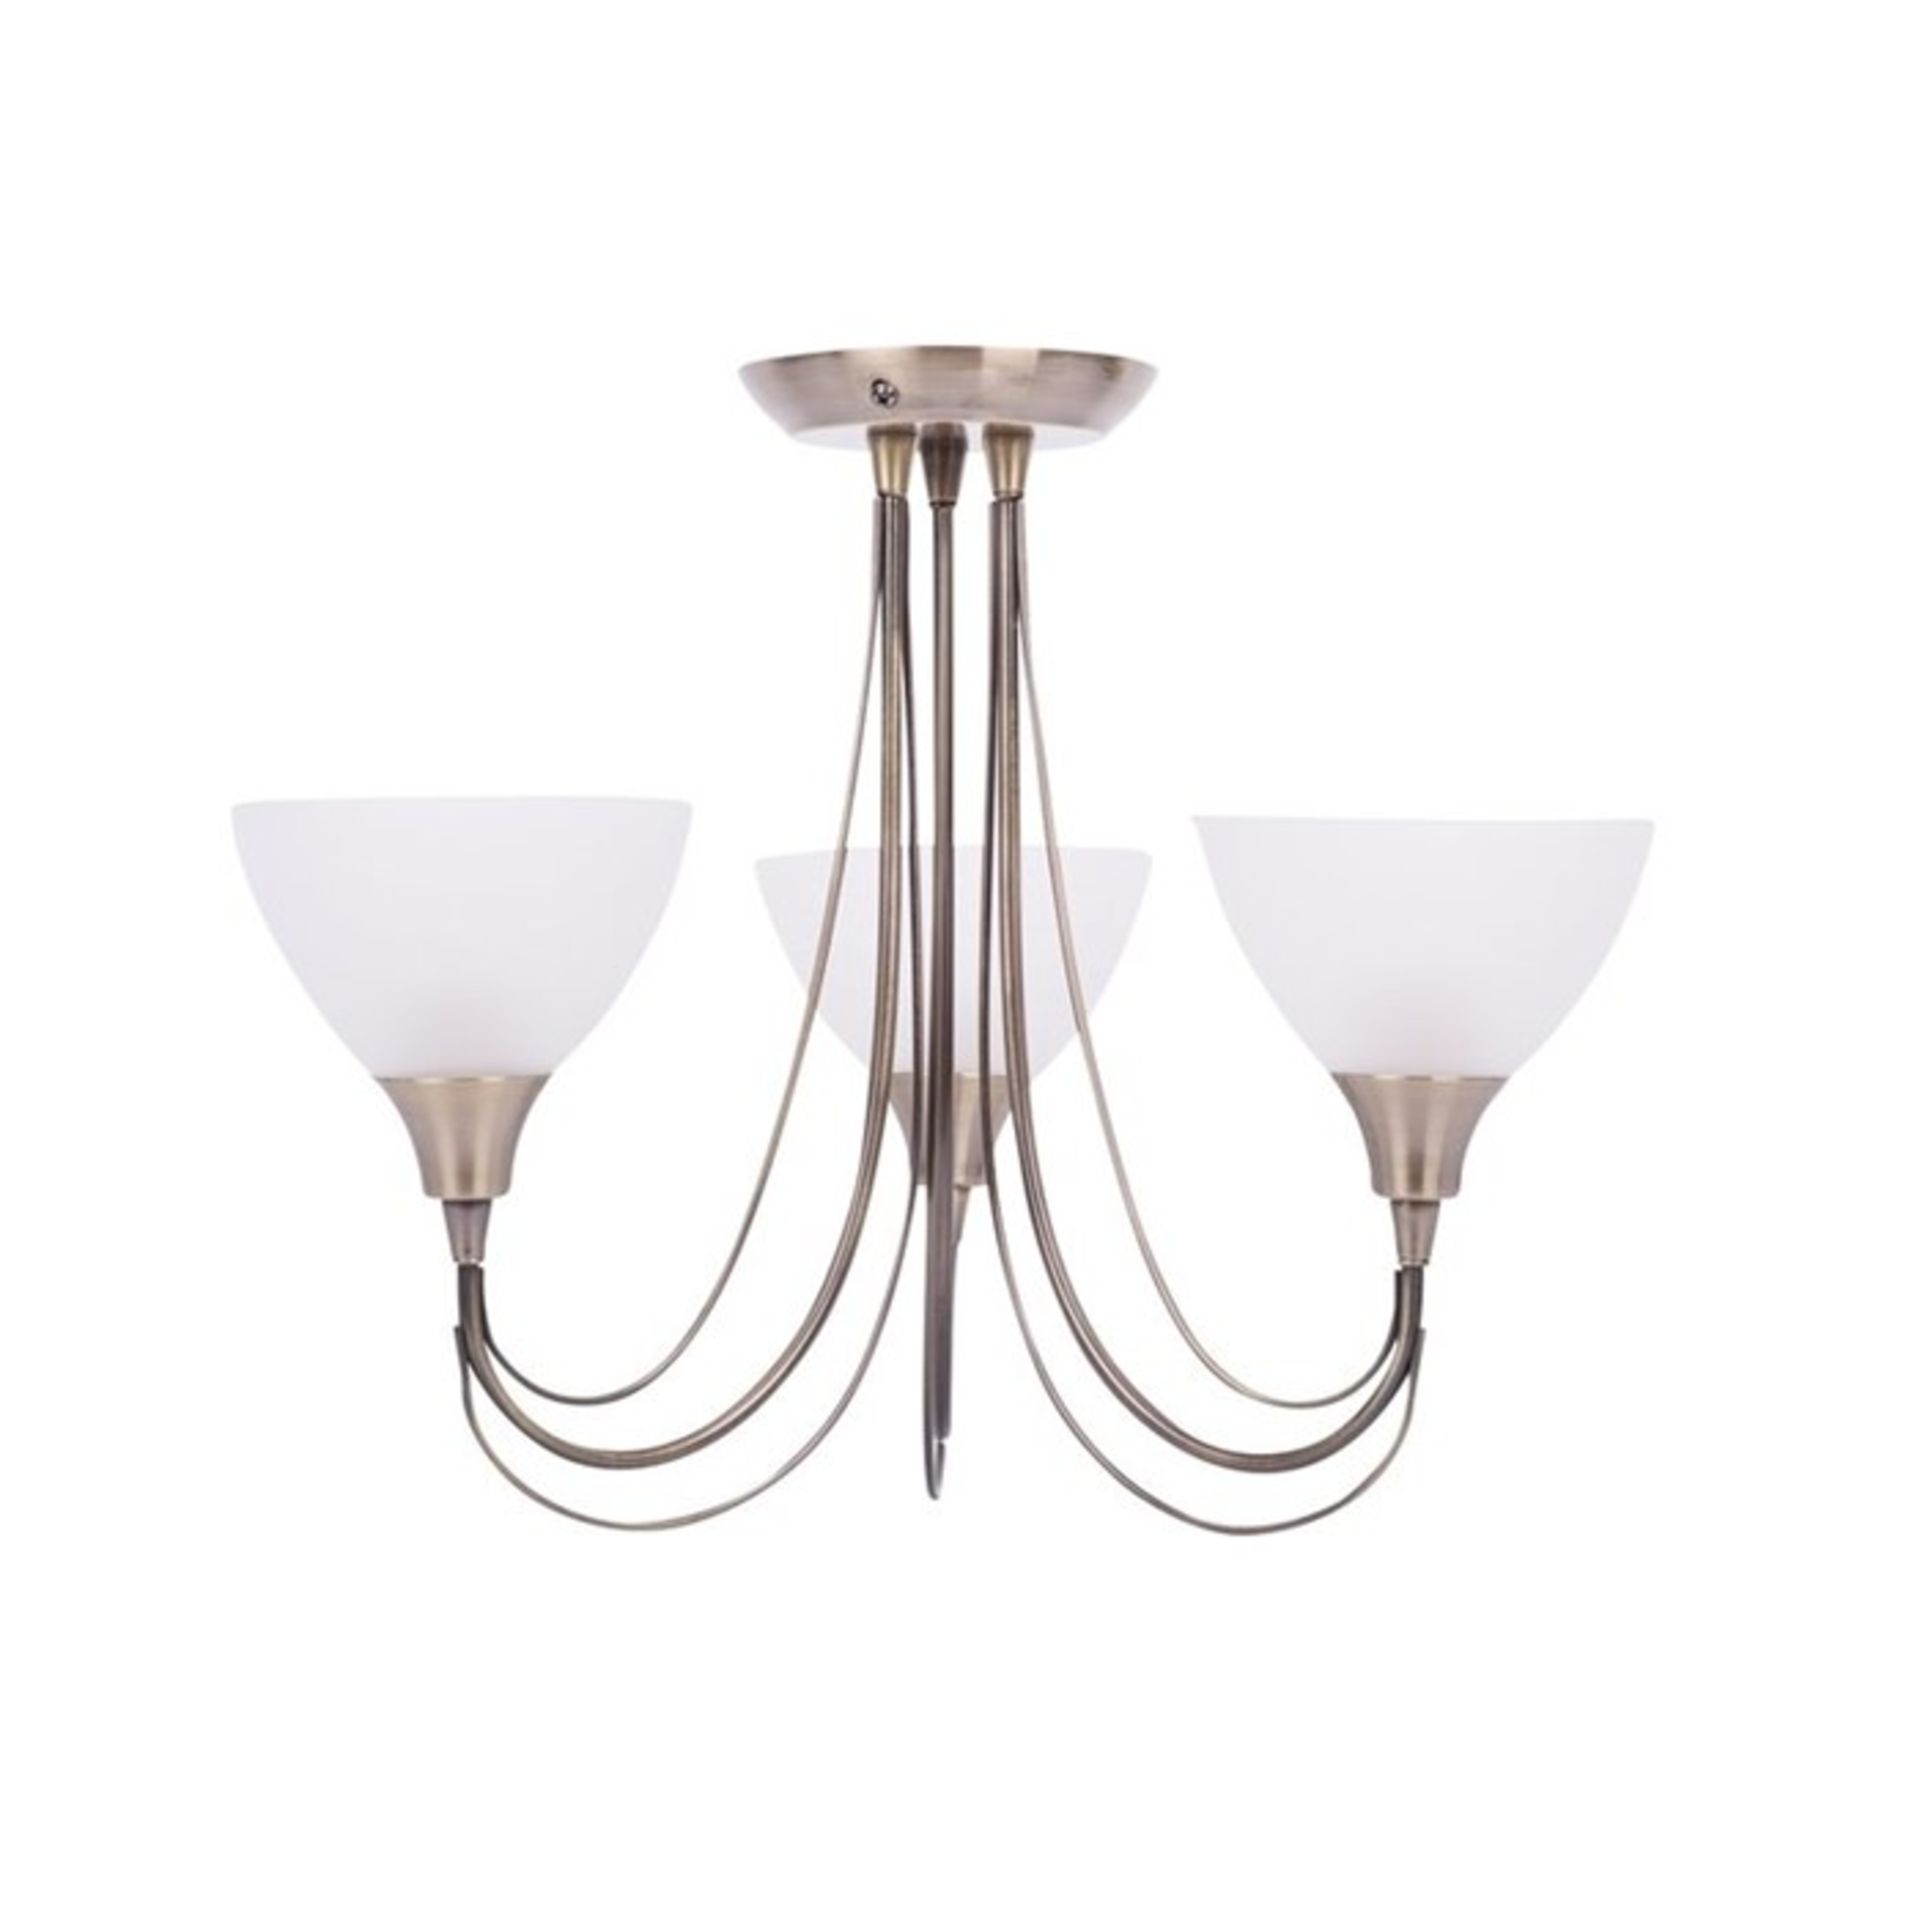 Marlow Home Co. Maryln 3-Light Semi Flush Mount - RRP £33.99 (FTCL1201 - 17096/28) (RETURN)